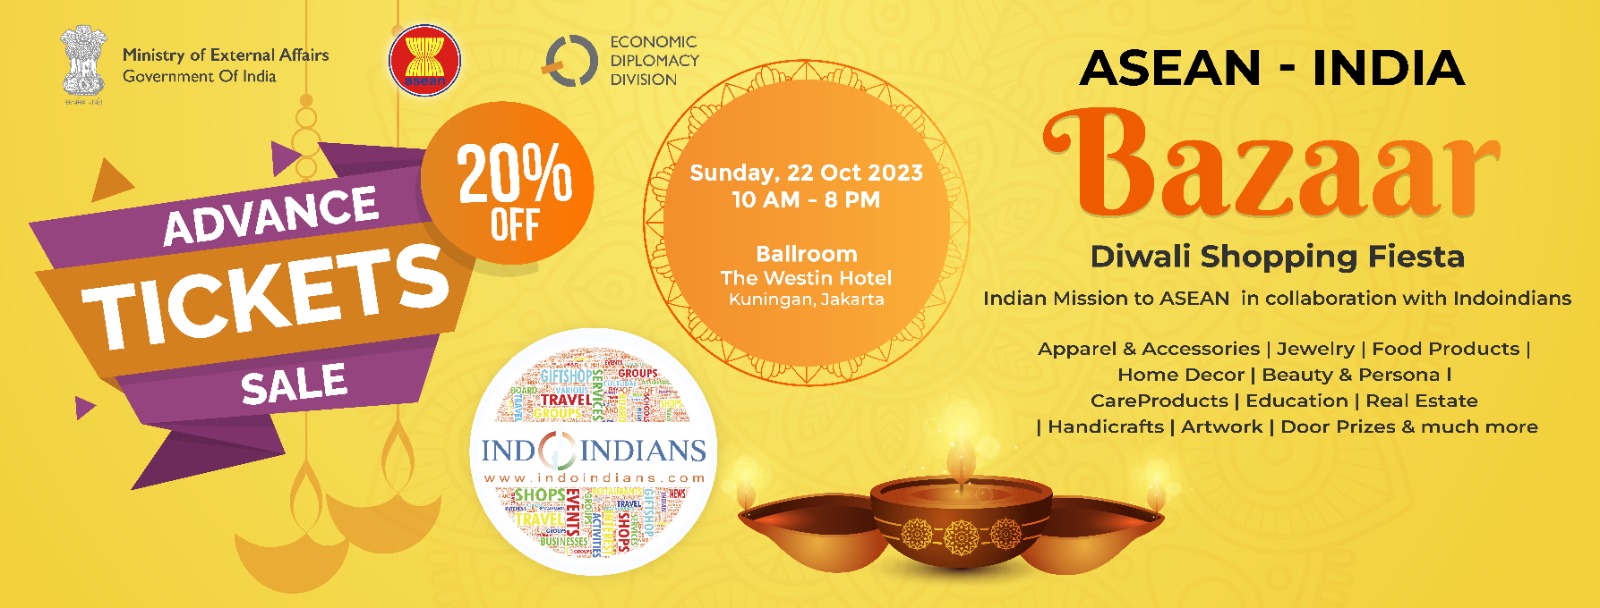 Advance Tickets For The ASEAN – India Diwali Bazaar Special Promo – 20% off